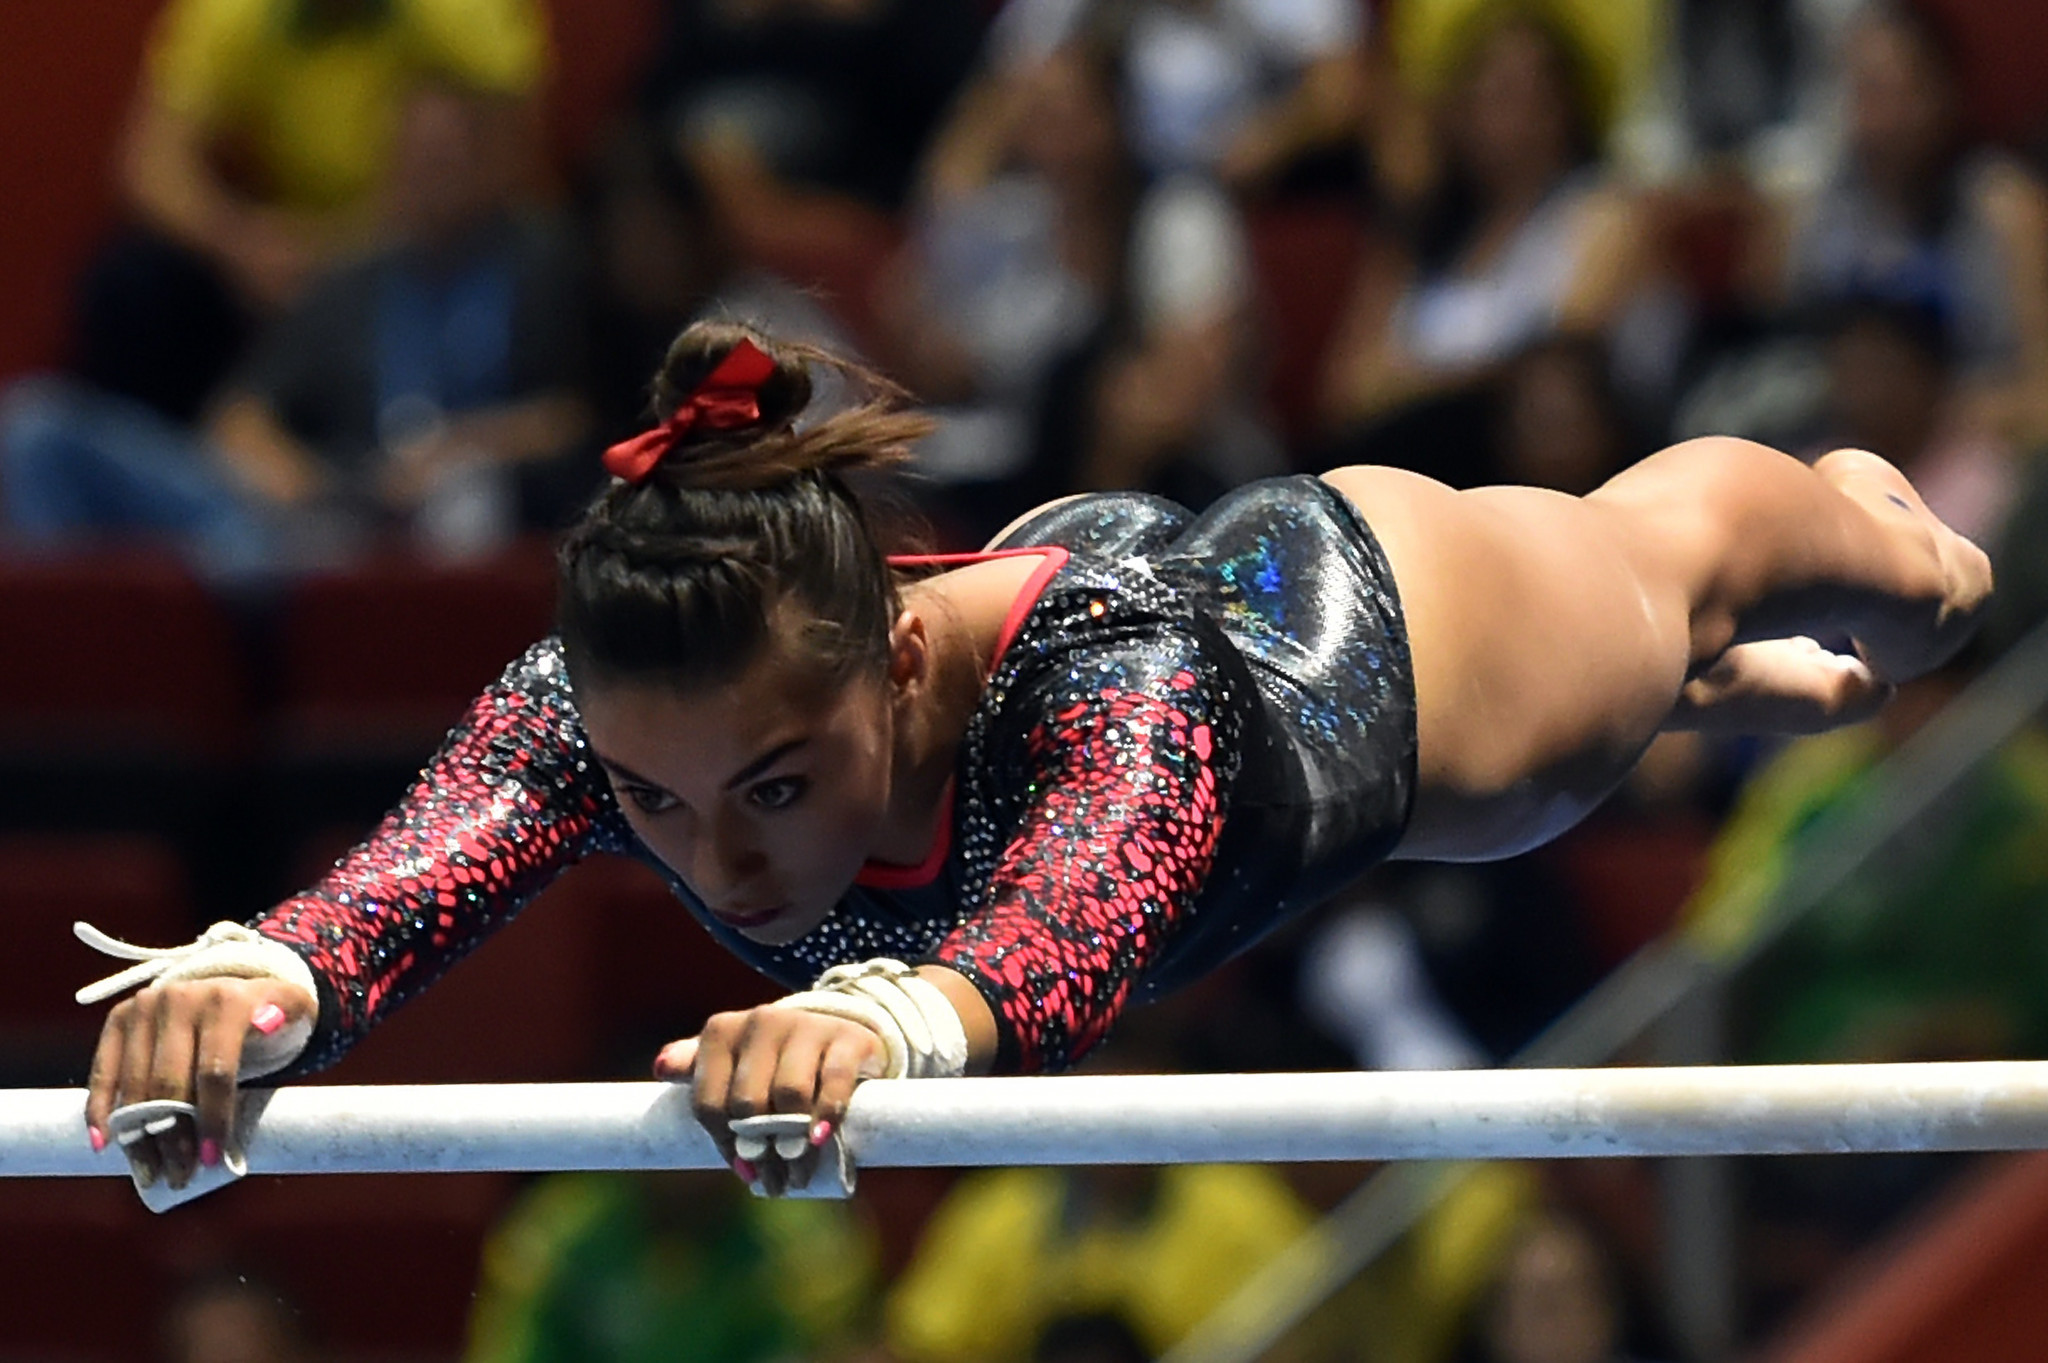 Mexico’s Ahtziri Sandoval won the women’s uneven bars gold medal on the first day of finals at the FIG World Challenge Cup in Guimarães in Portugal ©Getty Images